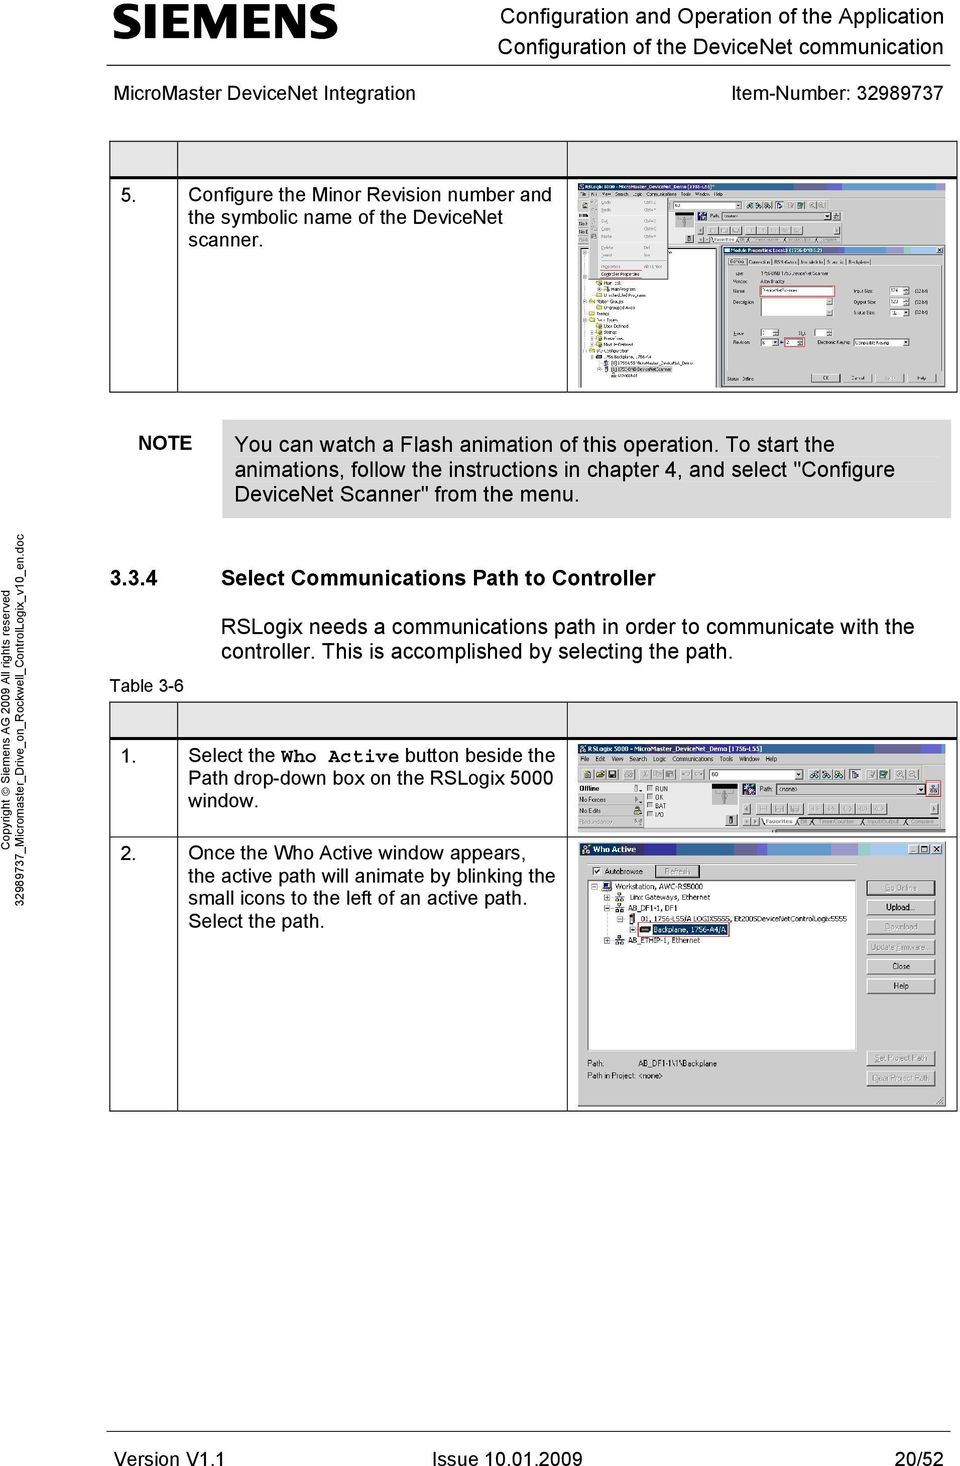 3.4 Select Communications Path to Controller Table 3-6 RSLogix needs a communications path in order to communicate with the controller. This is accomplished by selecting the path.